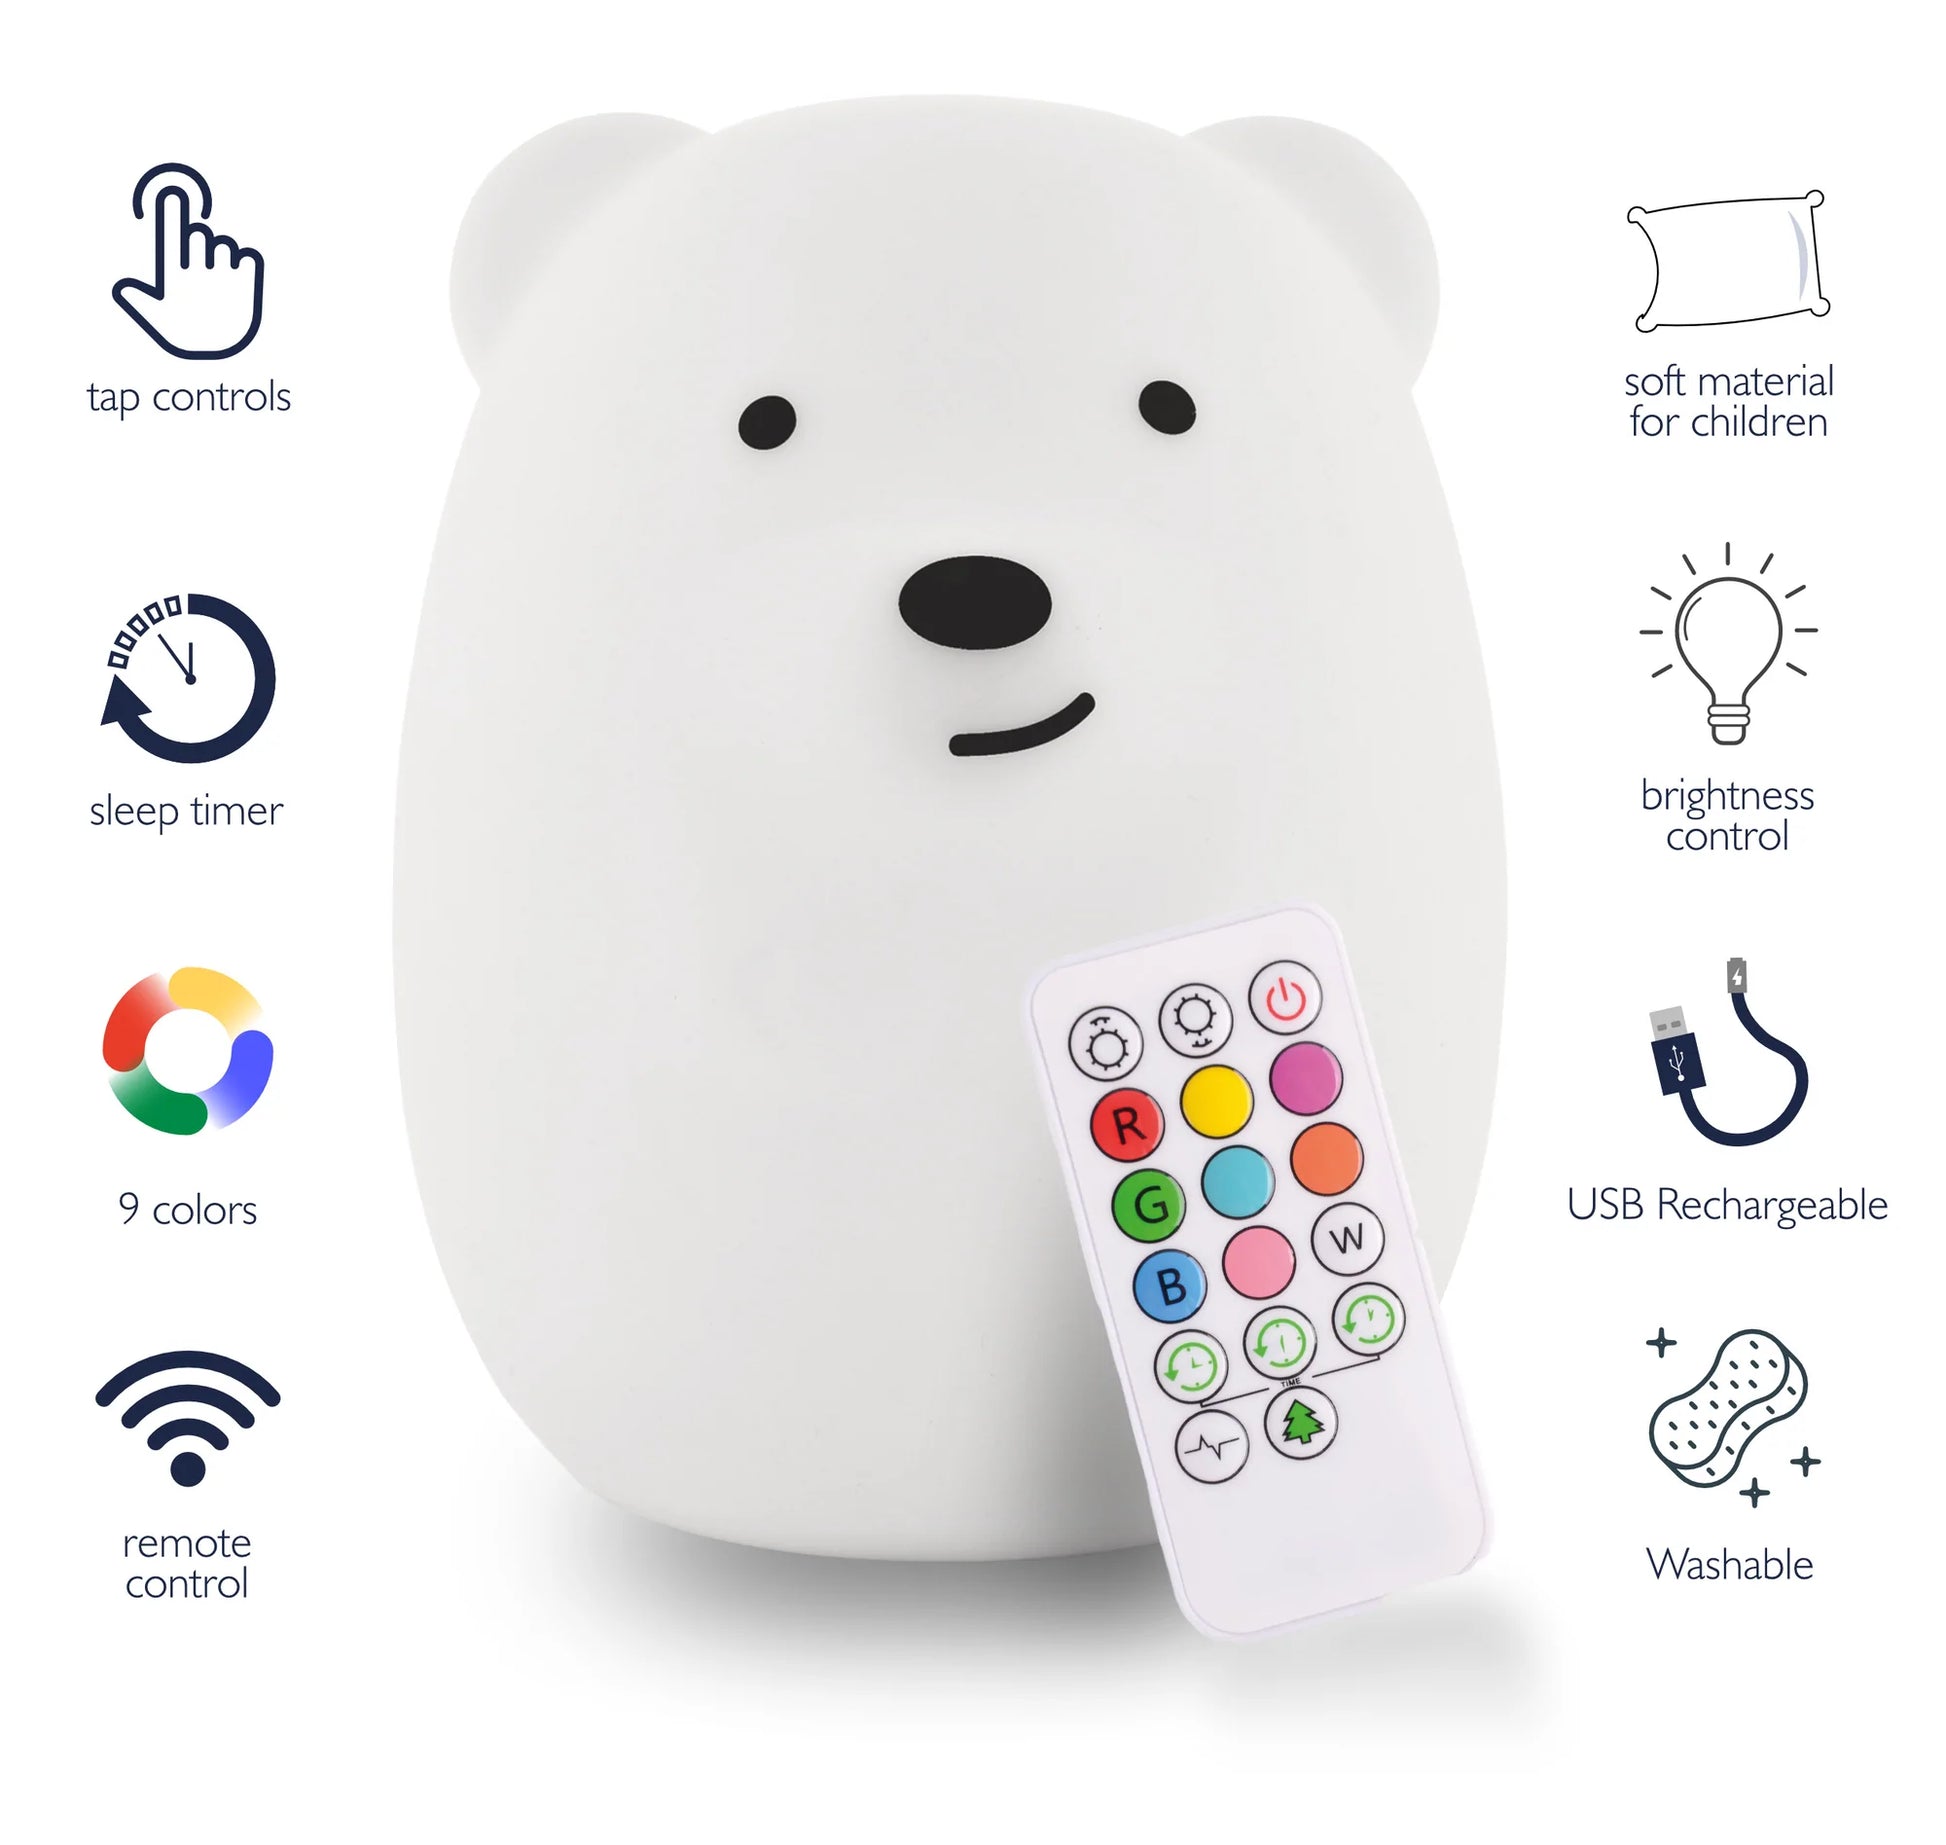 Round white silicon bear that lights up on touch, or with remote (included in picture)